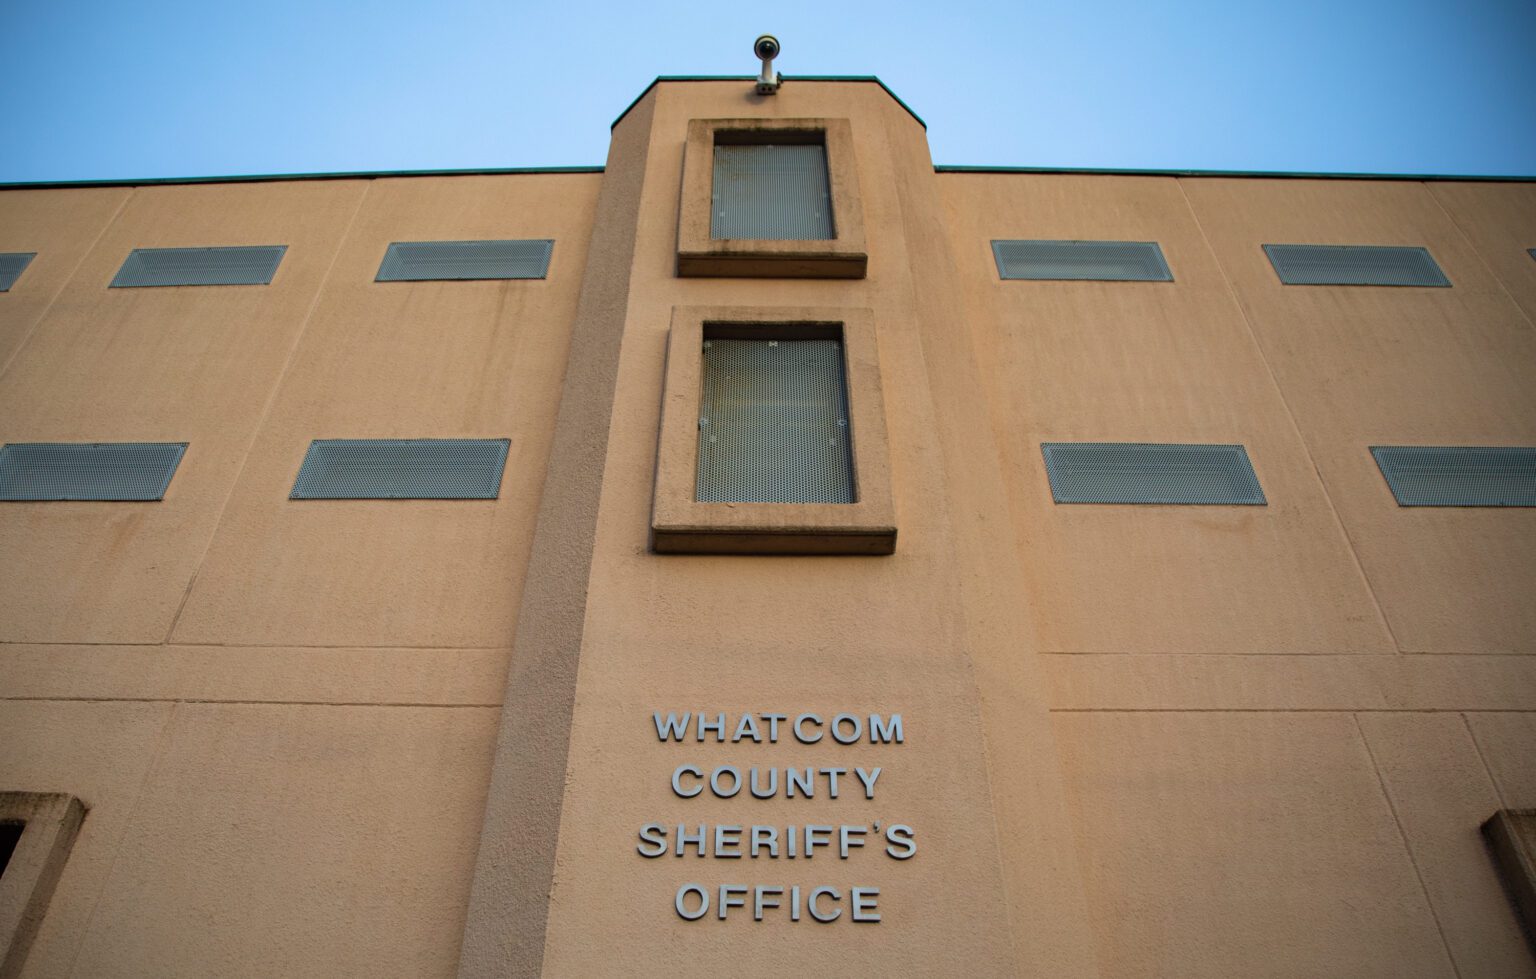 "Whatcom County Sheriff's Office" is listed on the side of an orange building.